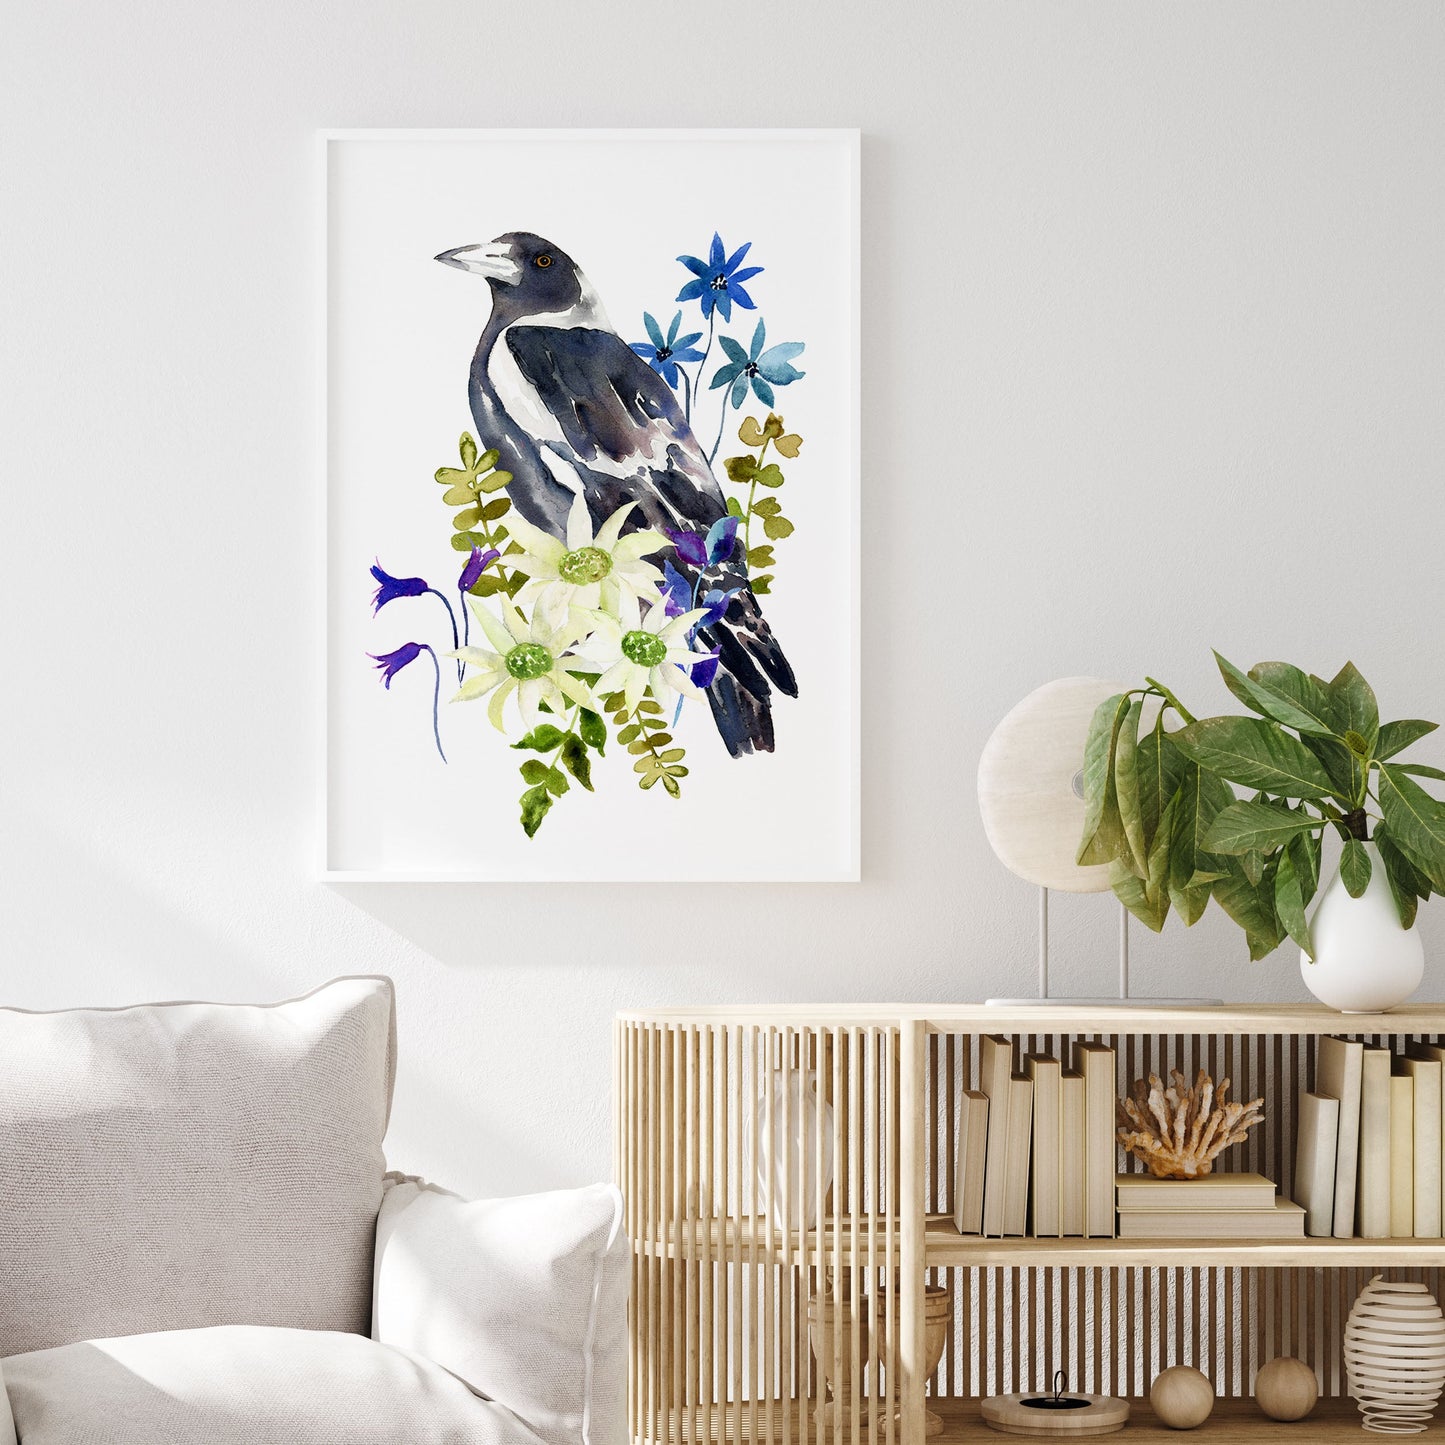 Merry Magpie - Limited Edition Archival Print Wholesale